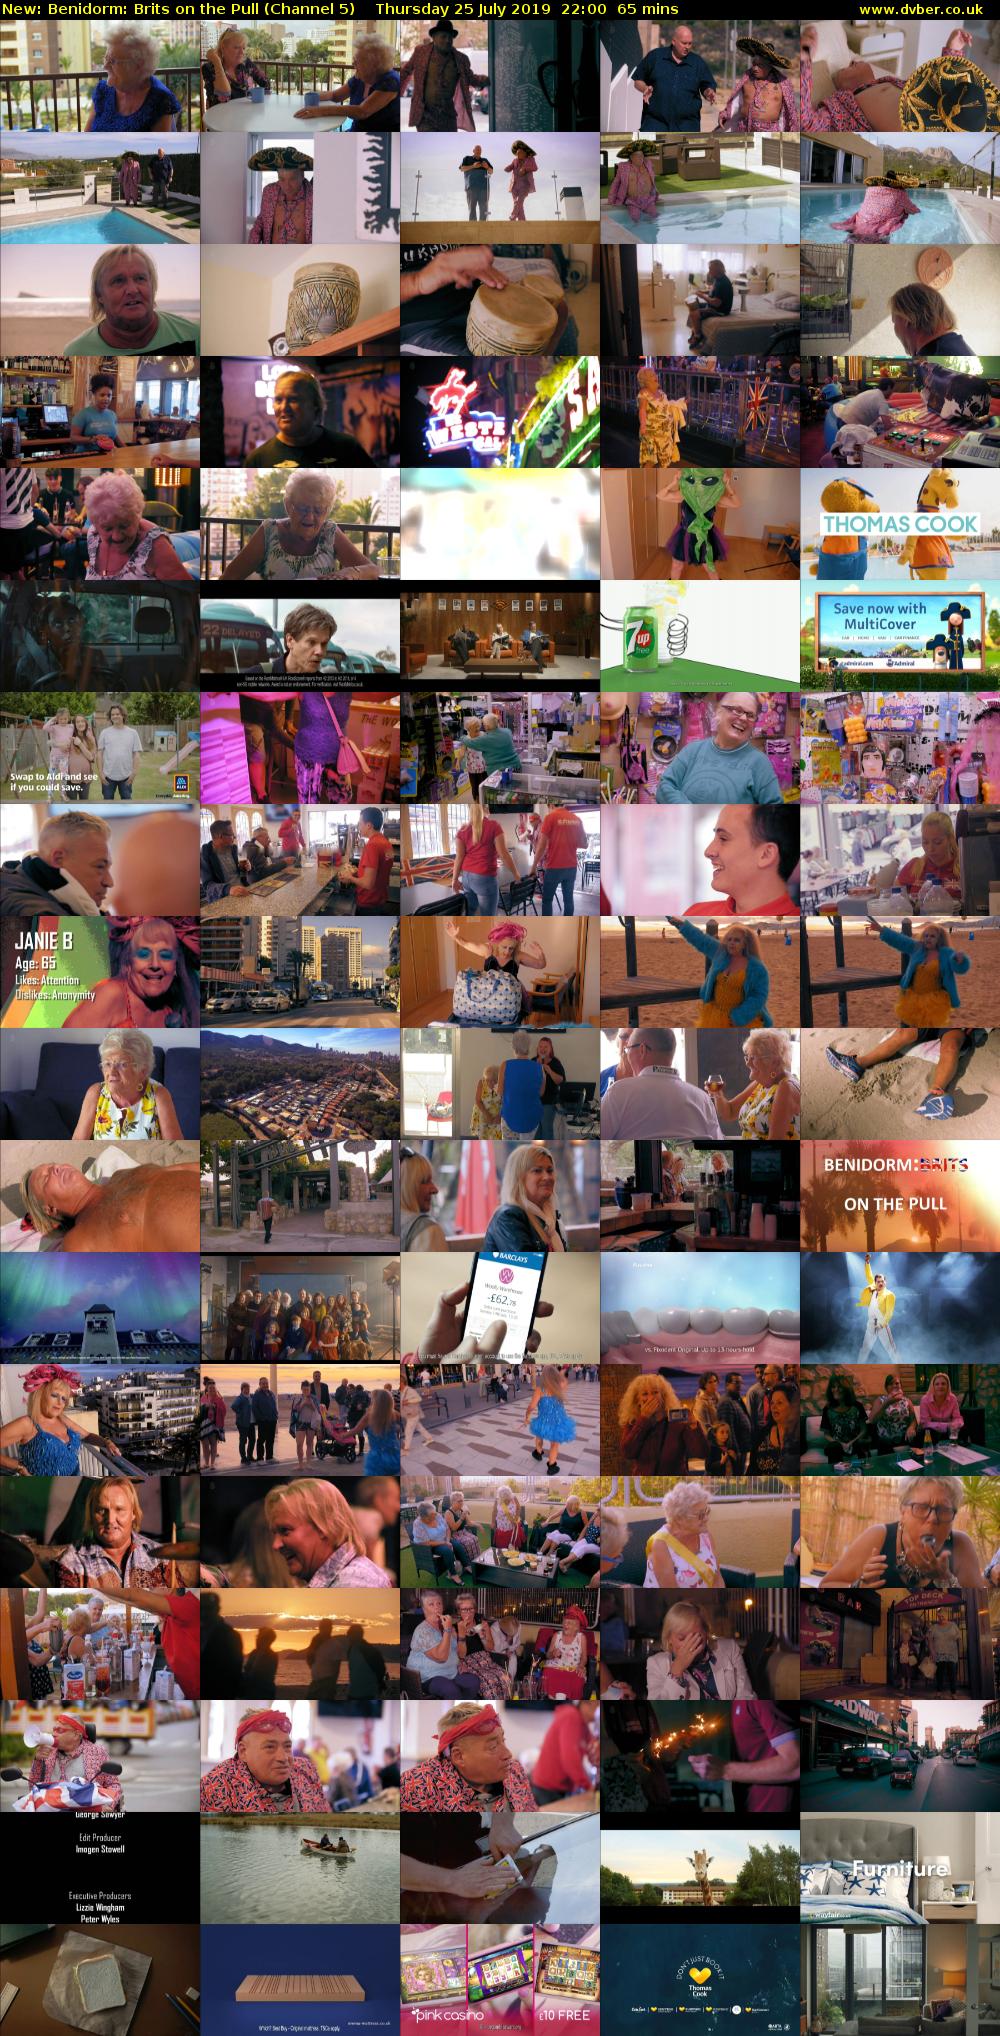 Benidorm: Brits on the Pull (Channel 5) Thursday 25 July 2019 22:00 - 23:05